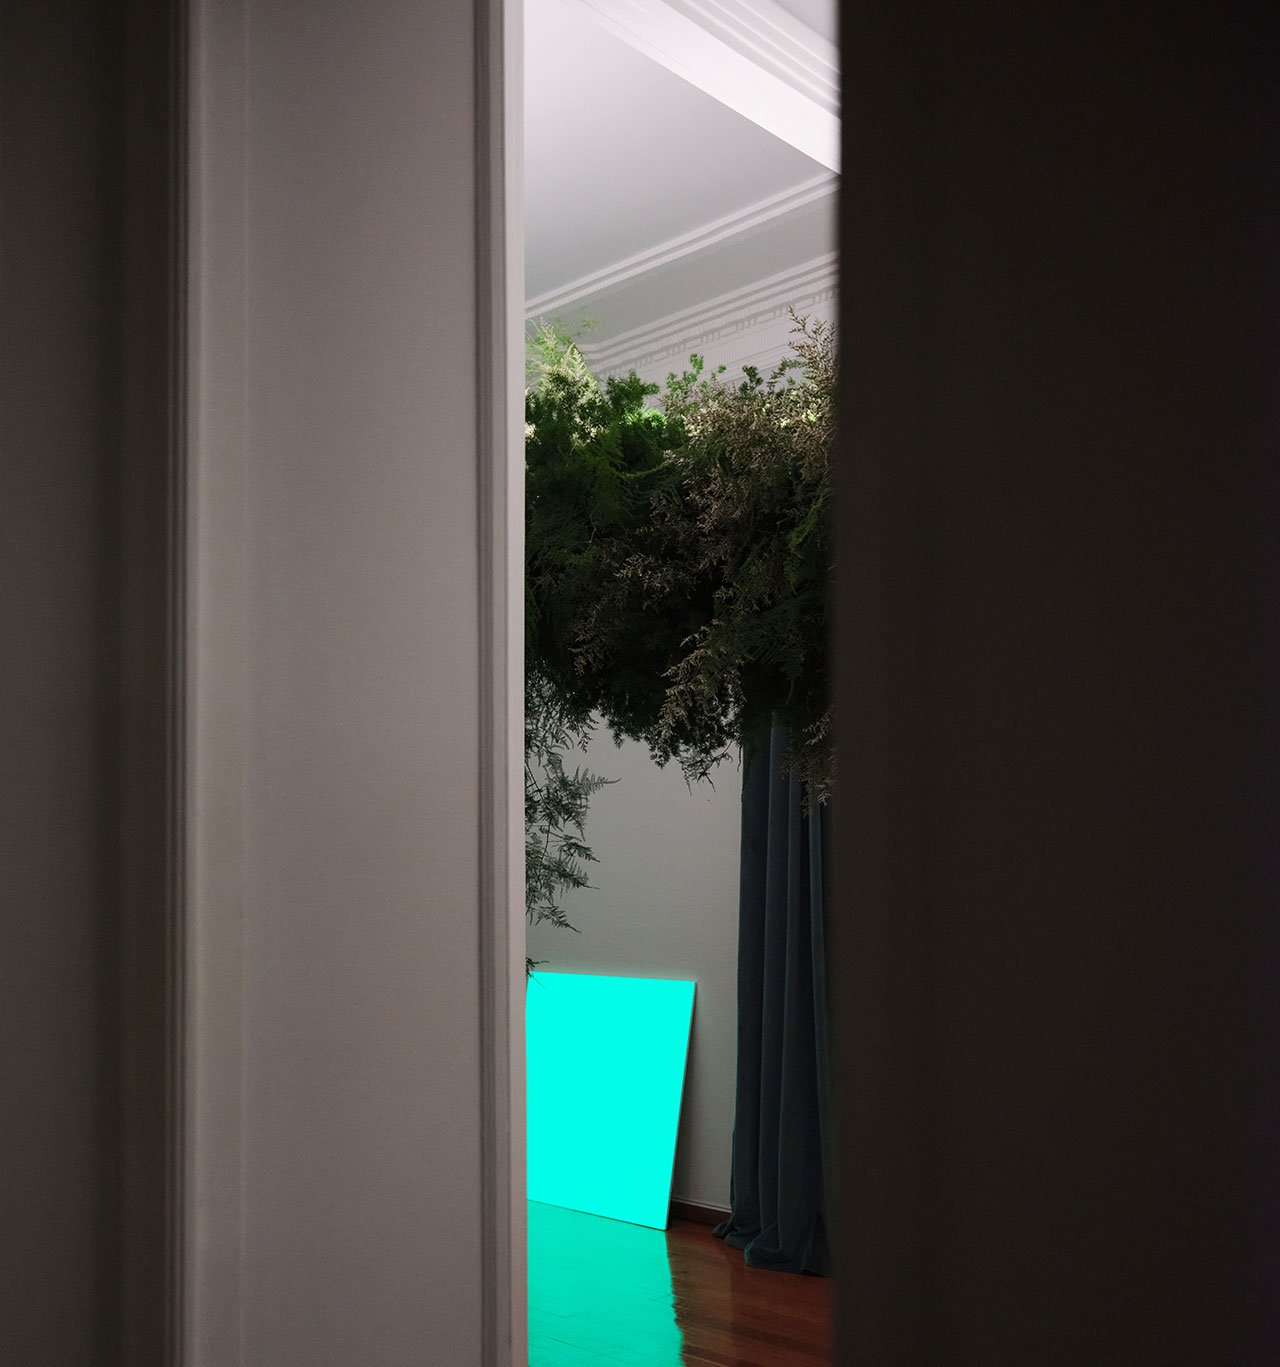 The Verdant Edition by Yatzer.Photo by Joseph Alexiadis.Featuring the PABLO luminous panel by Davide Groppi, SITE-SPECIFIC.©YATZERLAB, Athens, 2022.